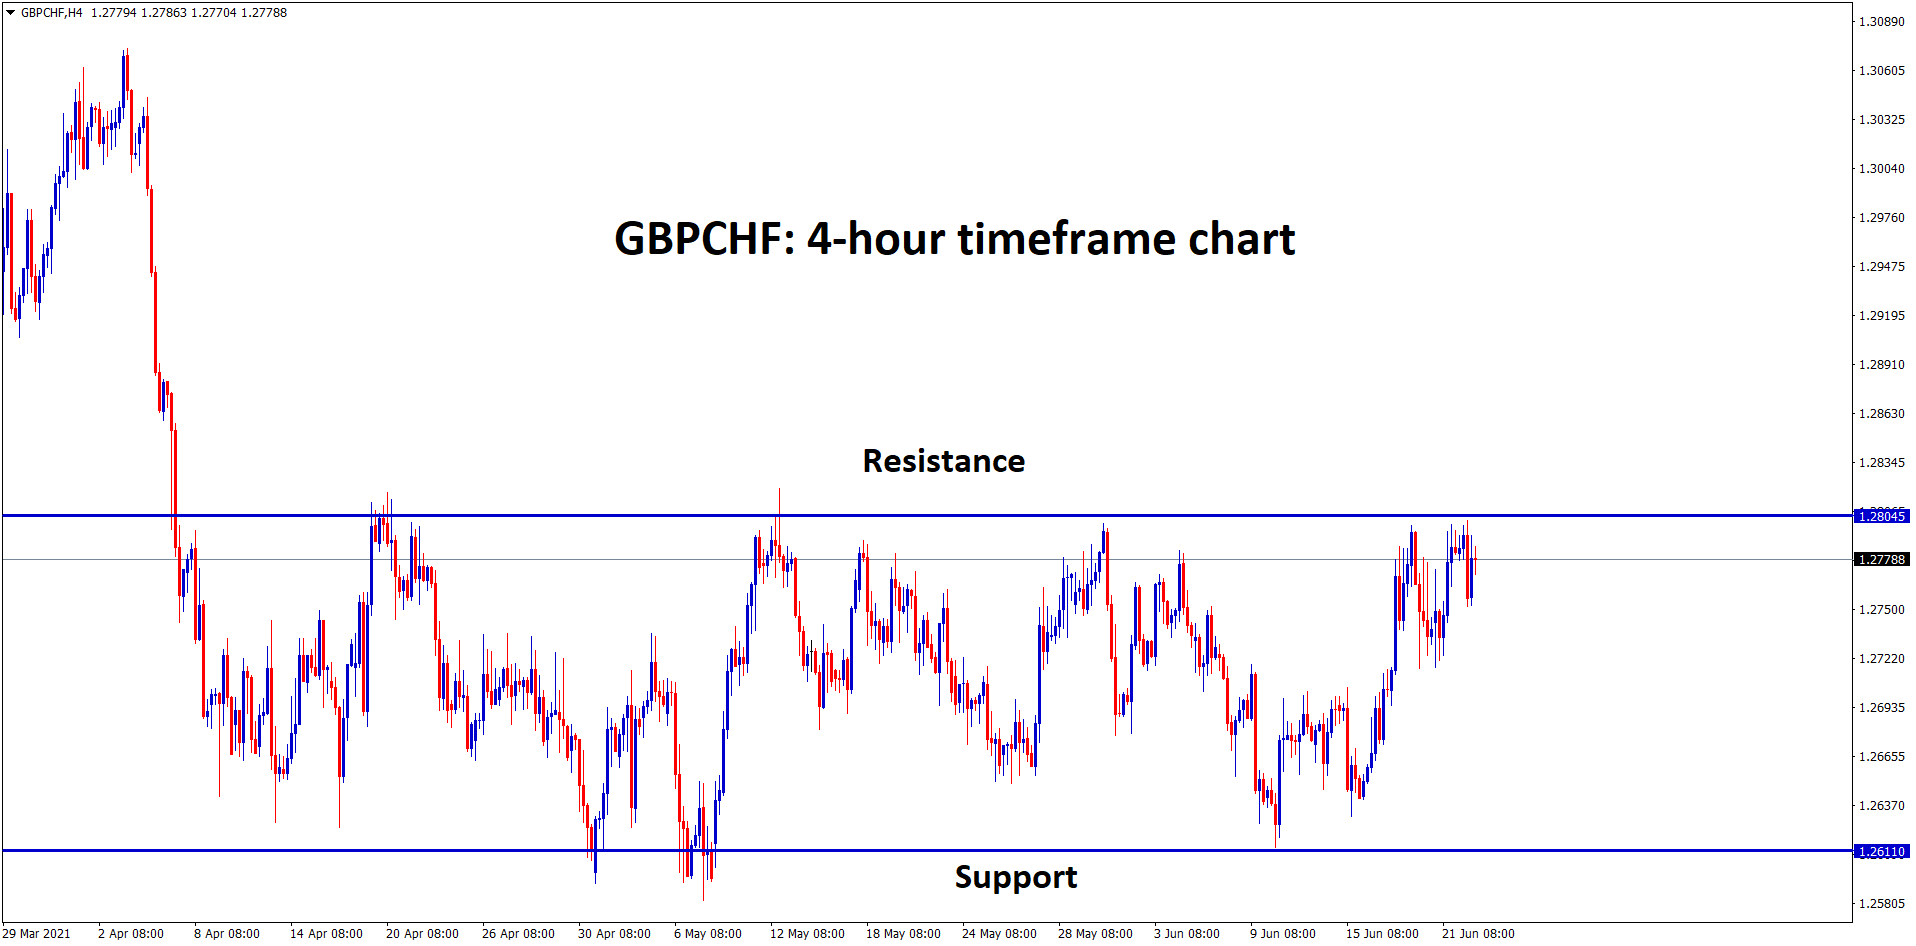 GBPCHF at the resistance level now currently in the ranging market